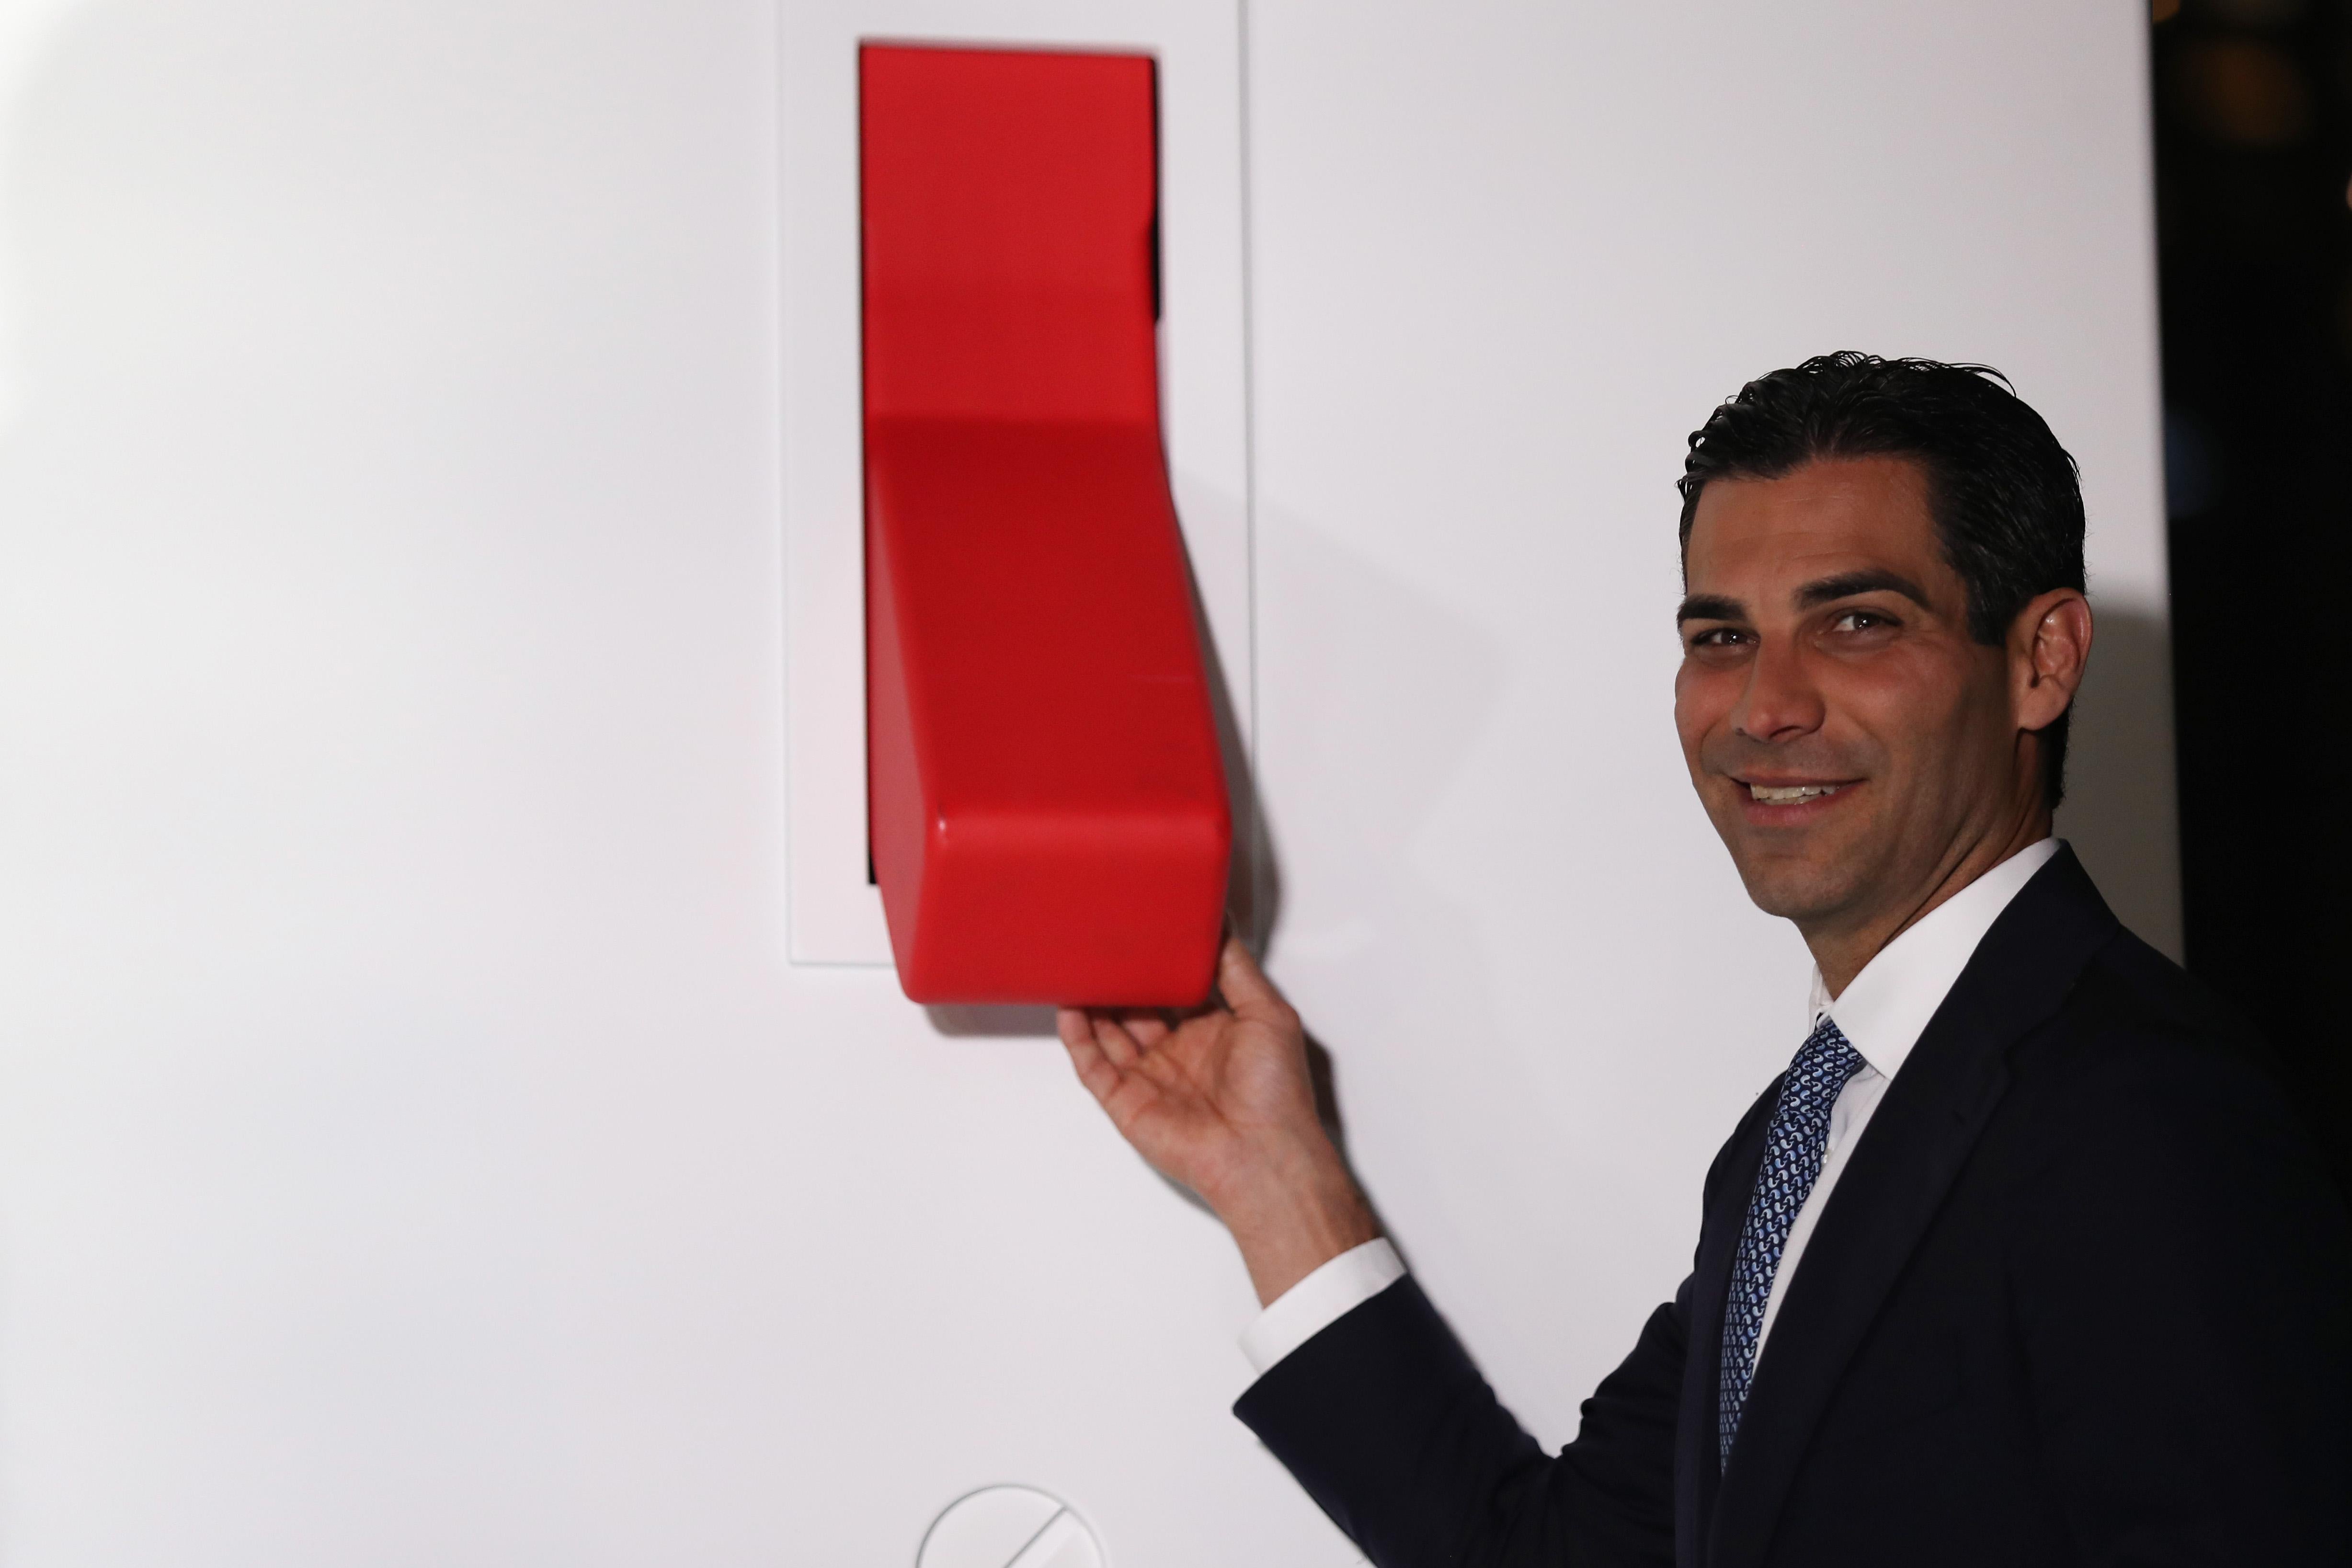 Francis Suarez poses in front of a giant red light switch on a wall at a new development in Miami